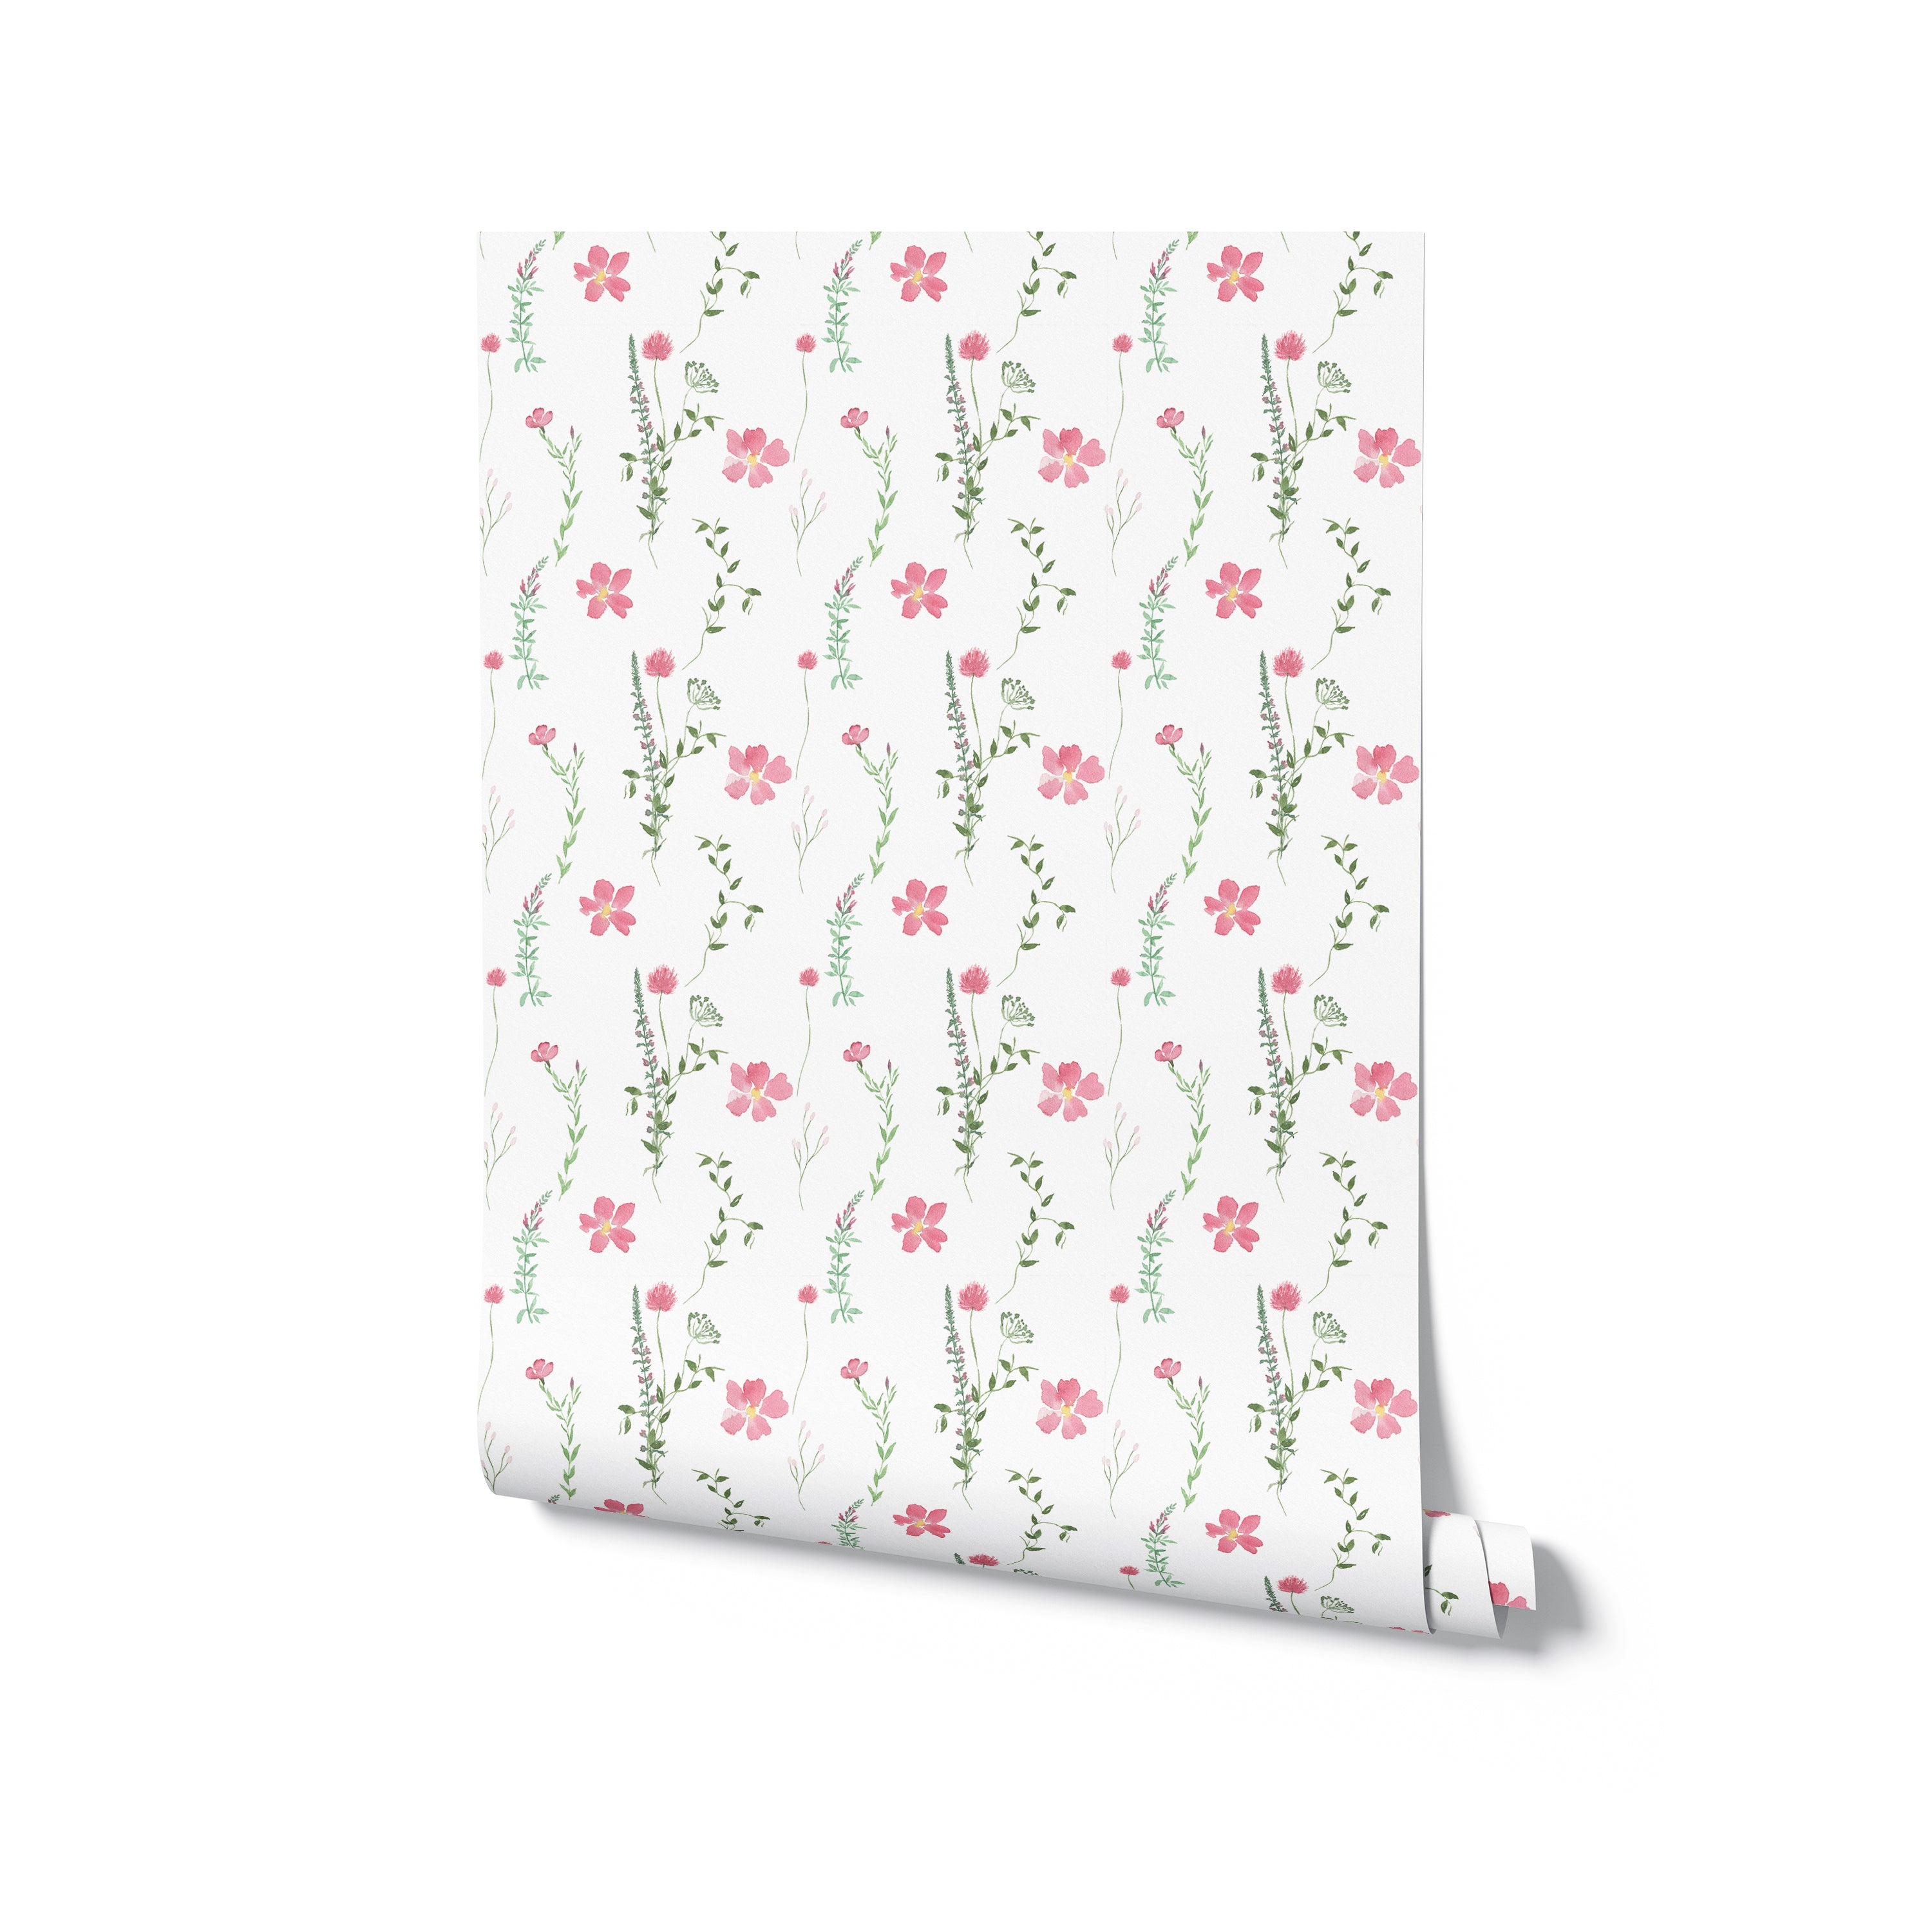 A roll of Spring Serenity Wallpaper showing its continuous pattern of pink flowers and green leaves on a white background, perfect for adding a touch of spring to any room.